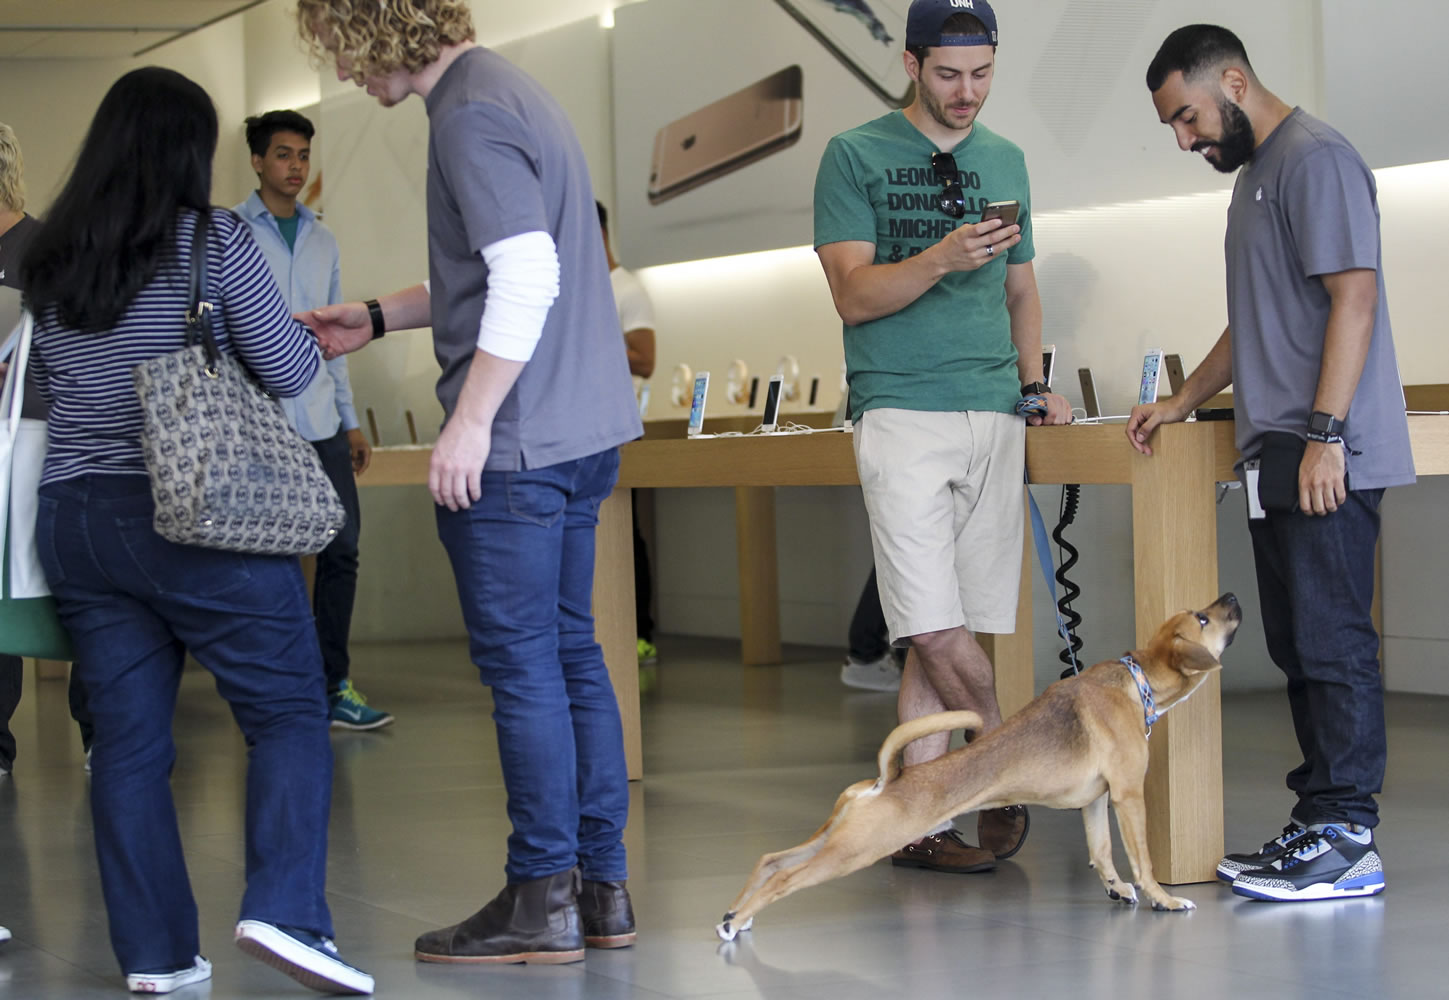 A dog stretches as a customer tries out Apple iPhone 6s and iPhone 6s Plus smartphones Friday at the Apple store at The Grove in Los Angeles. (Ringo H.W.